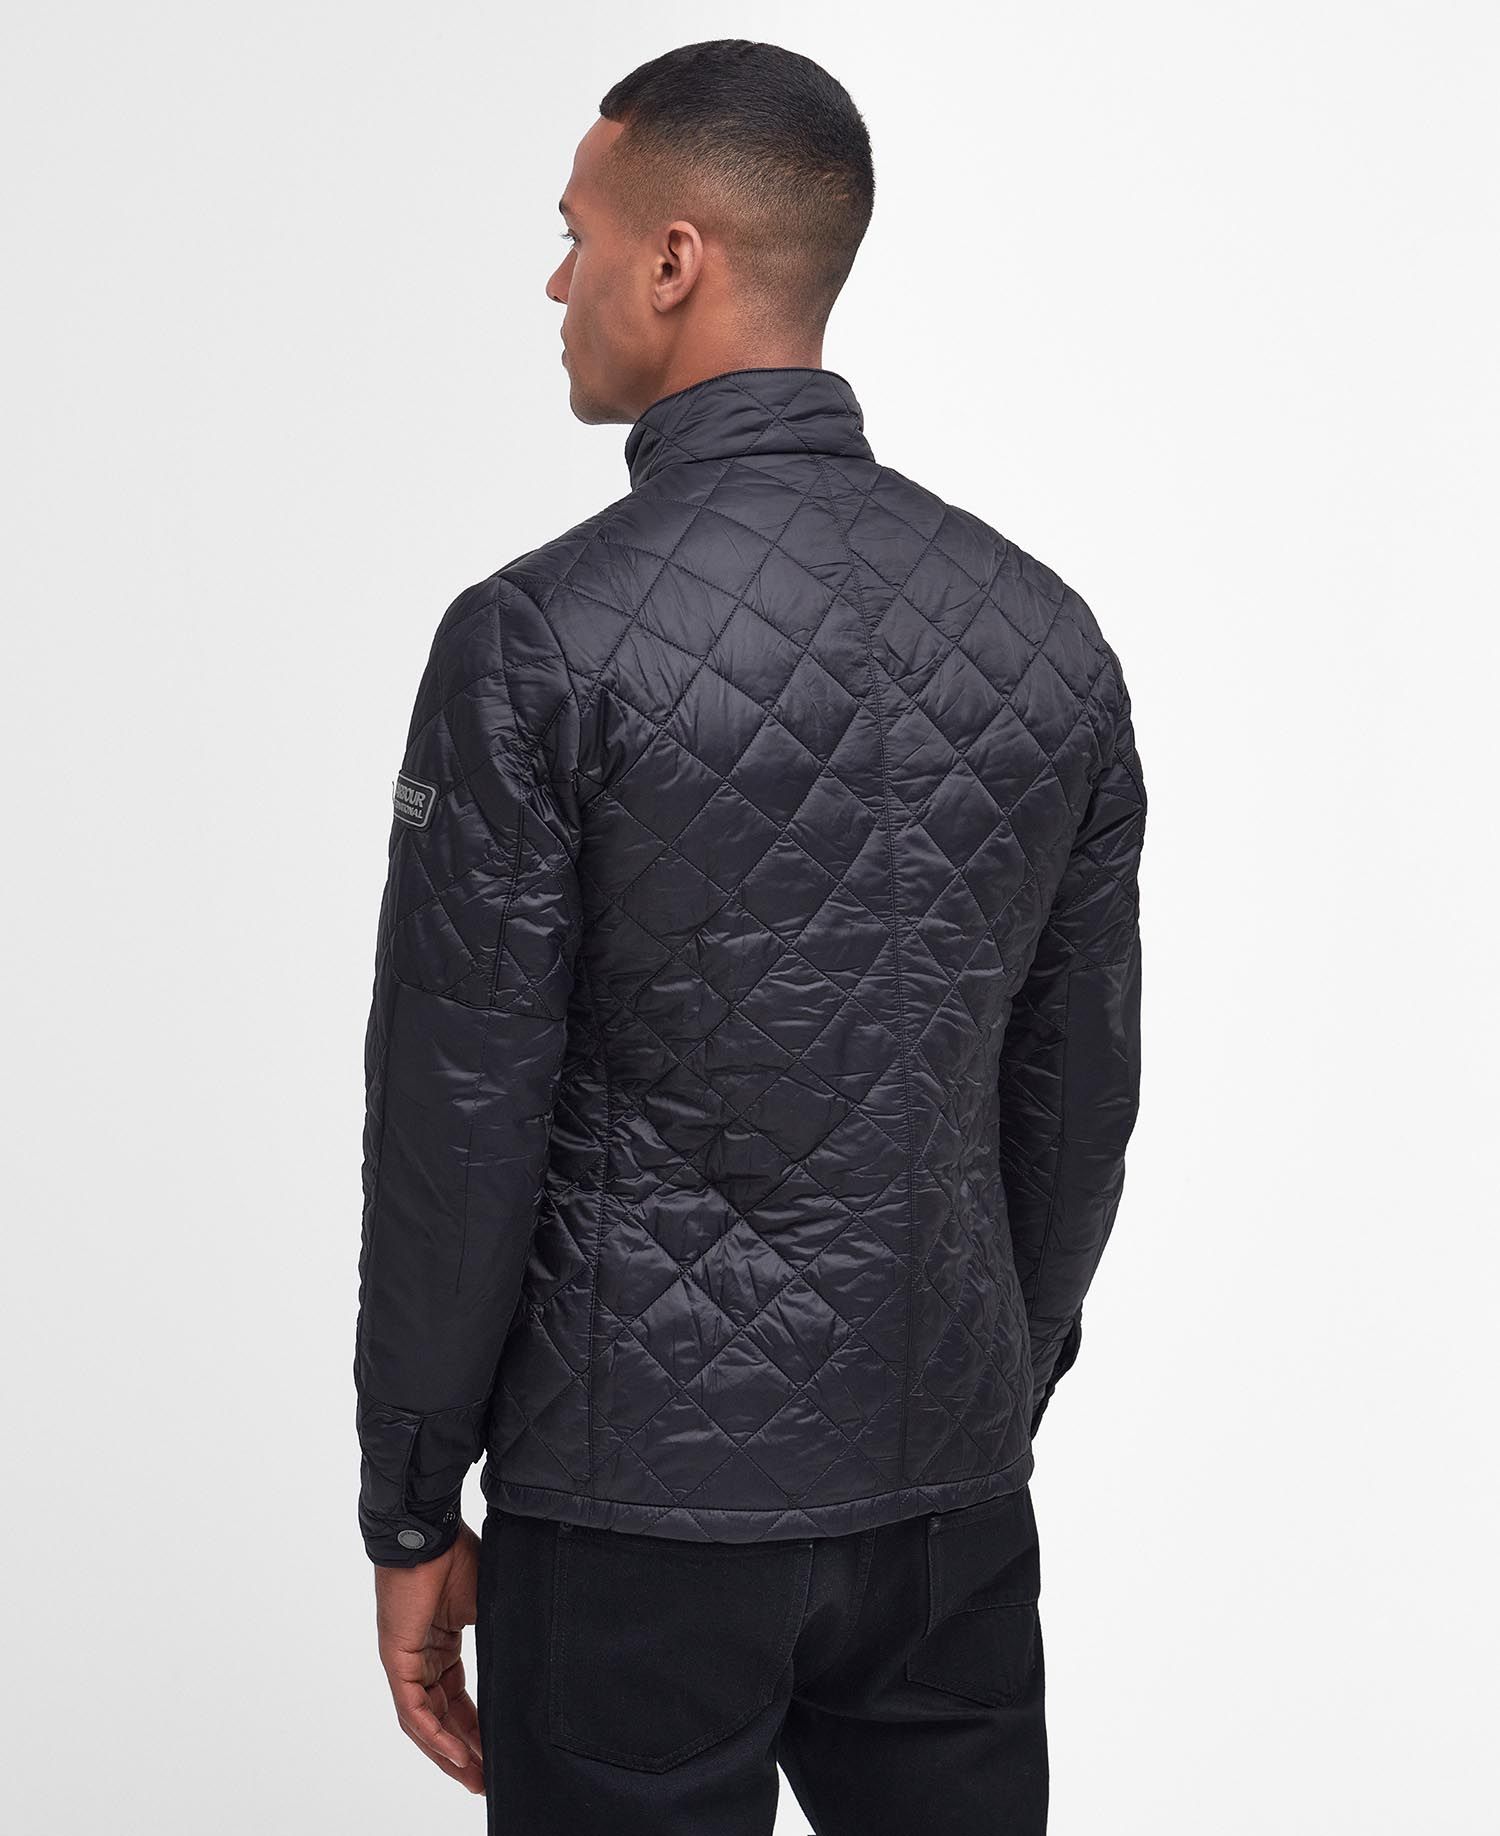 Shop the B.Intl Tourer Ariel Quilted Jacket today. | Barbour